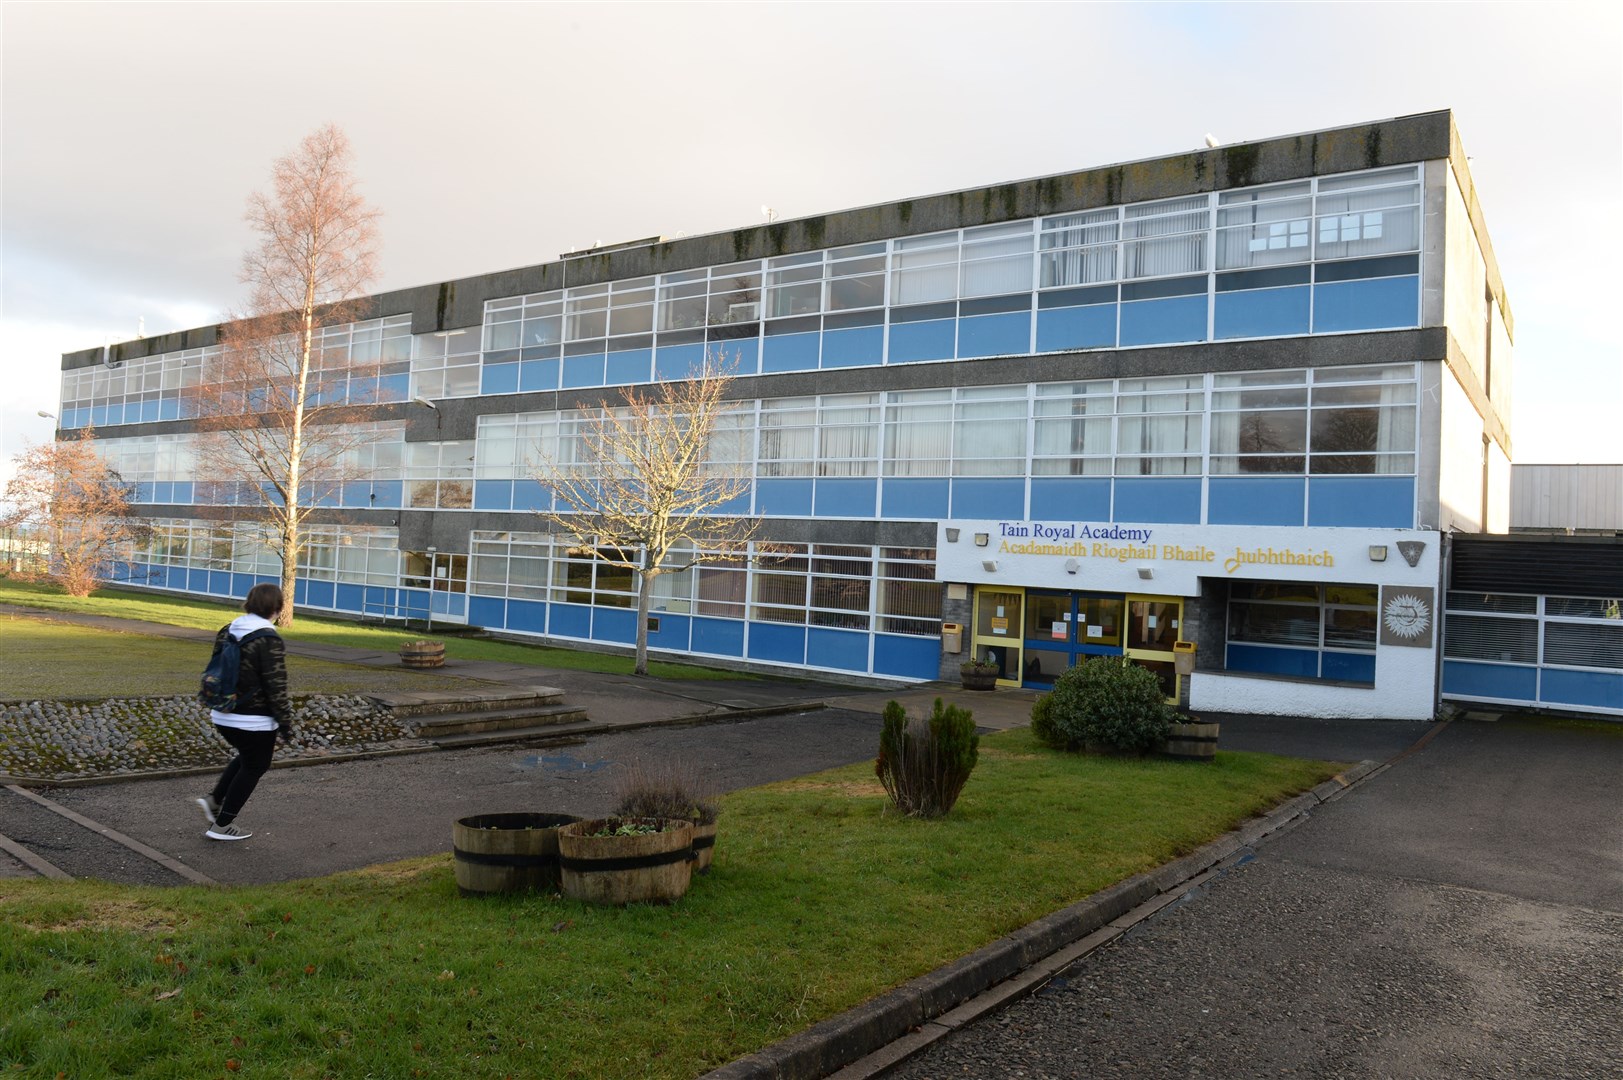 The existing Tain Royal Academy will, amongst other schools, be replaced under the scheme.